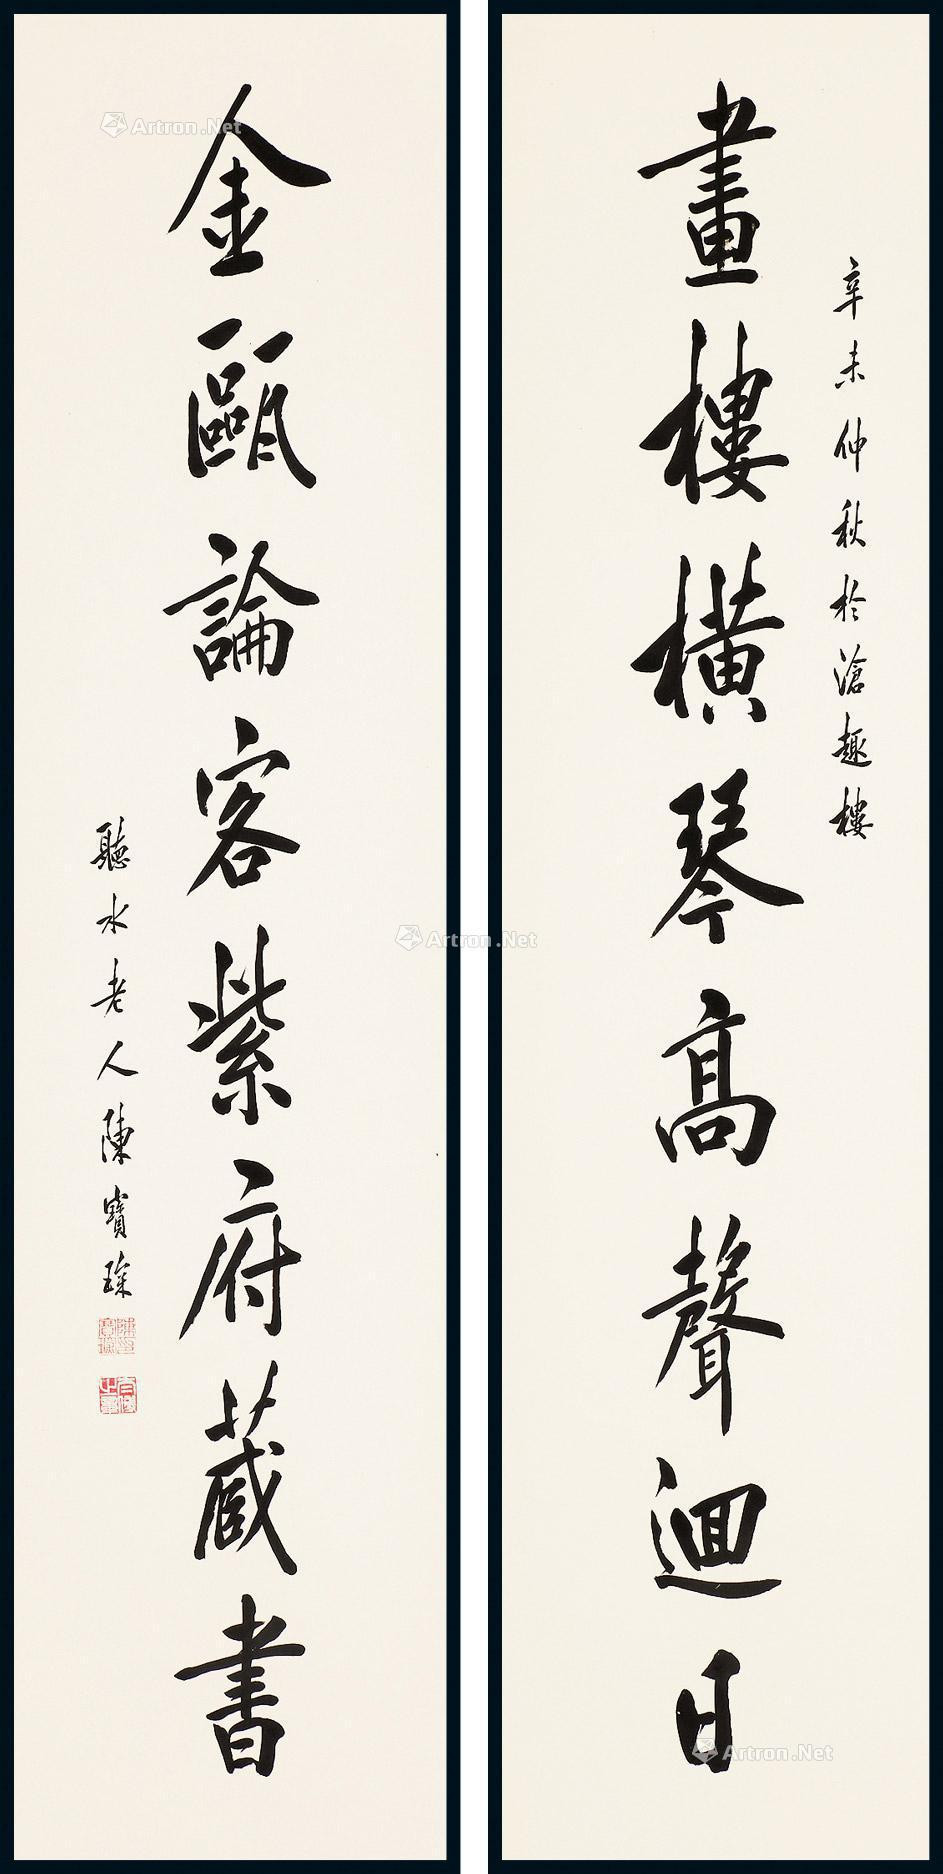 Calligraphy couplet by Chen Baochen